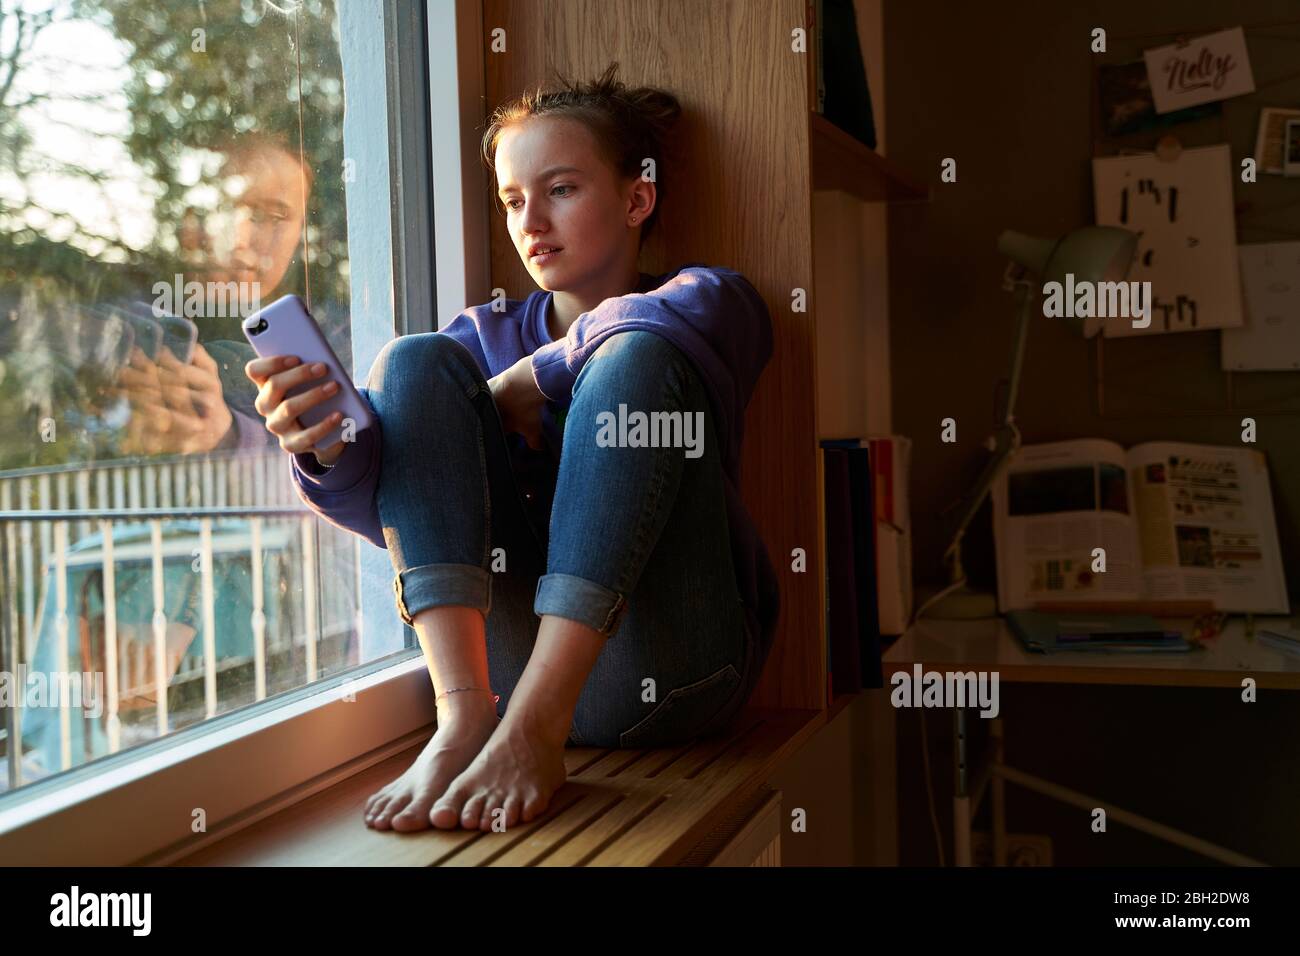 Girl sitting barefoot on window sill in the evening looking at smartphone Stock Photo